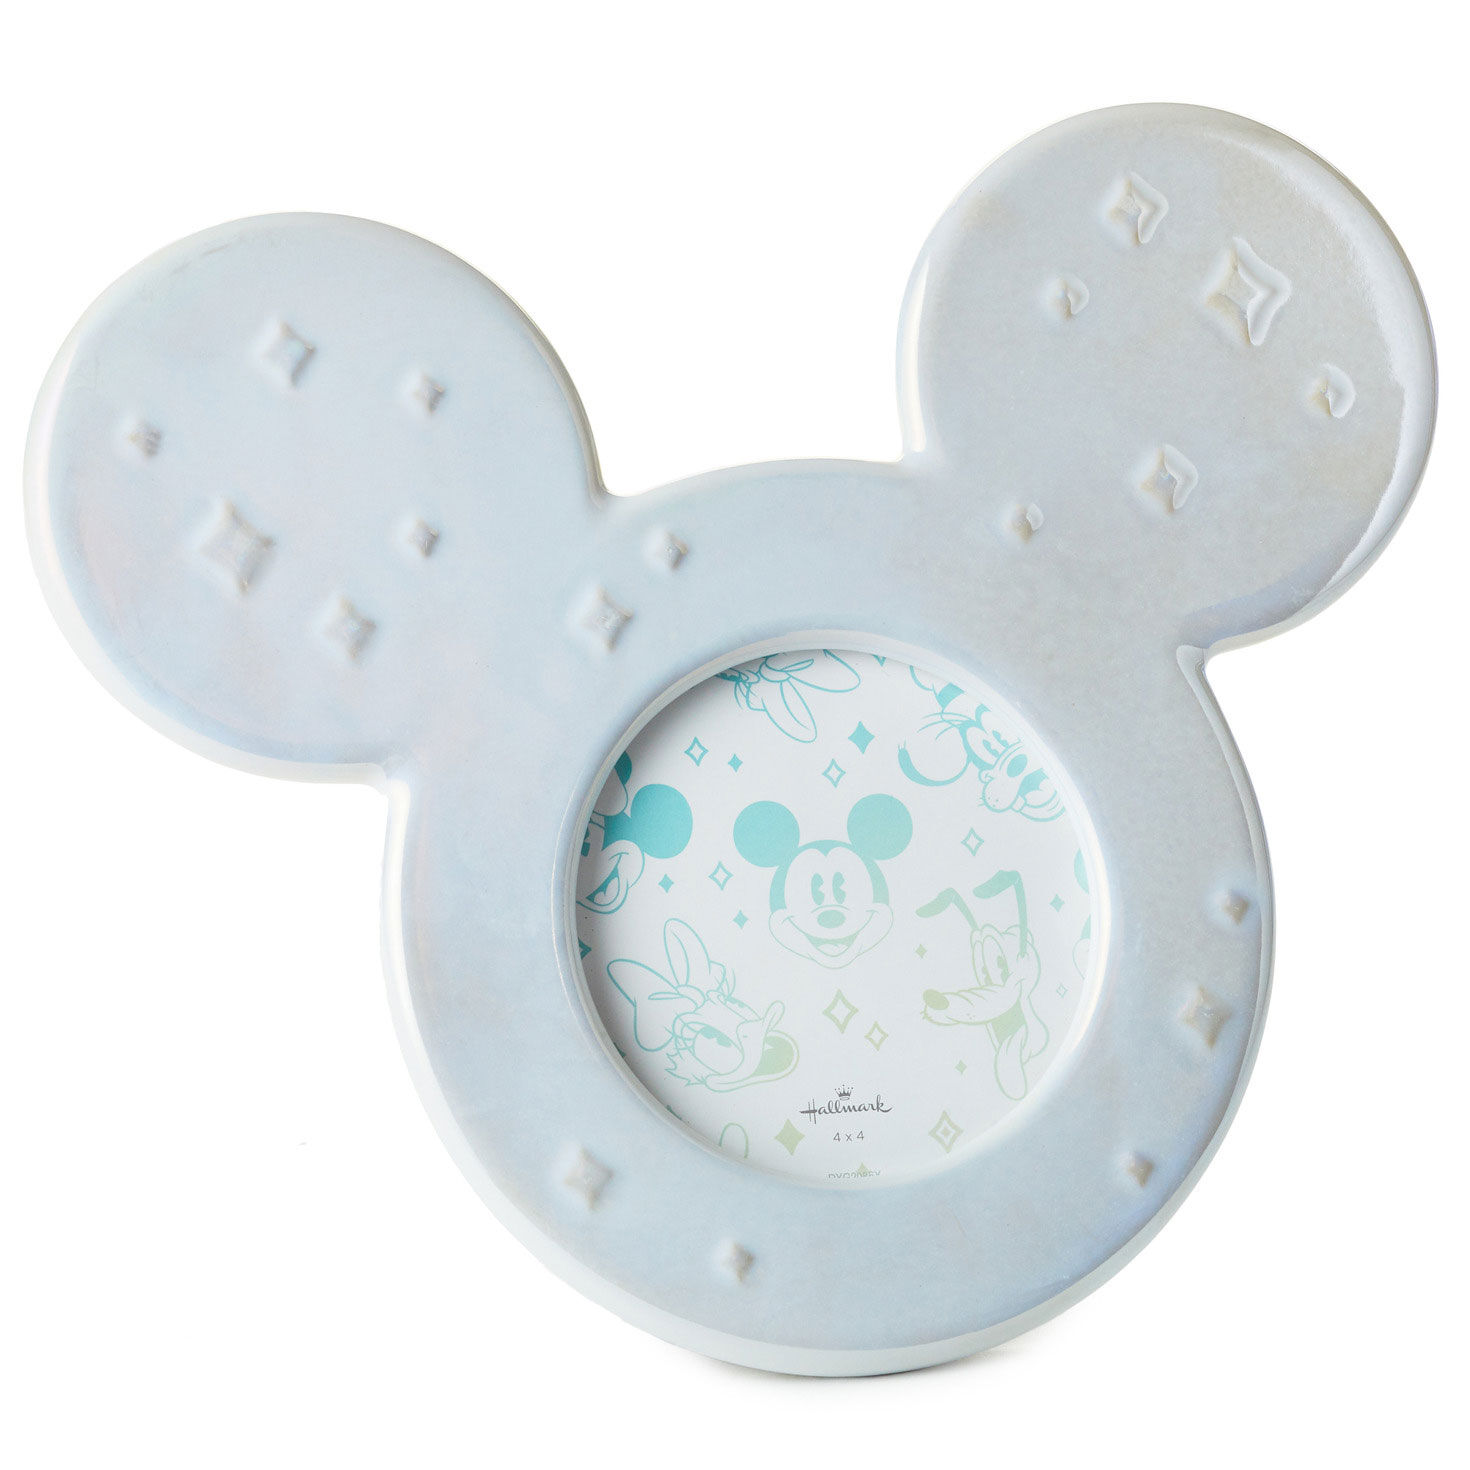 https://www.hallmark.com/dw/image/v2/AALB_PRD/on/demandware.static/-/Sites-hallmark-master/default/dwf070c54c/images/finished-goods/products/1DYG2086/Iridescent-Mickey-Ears-Ceramic-Picture-Frame_1DYG2086_01.jpg?sfrm=jpg